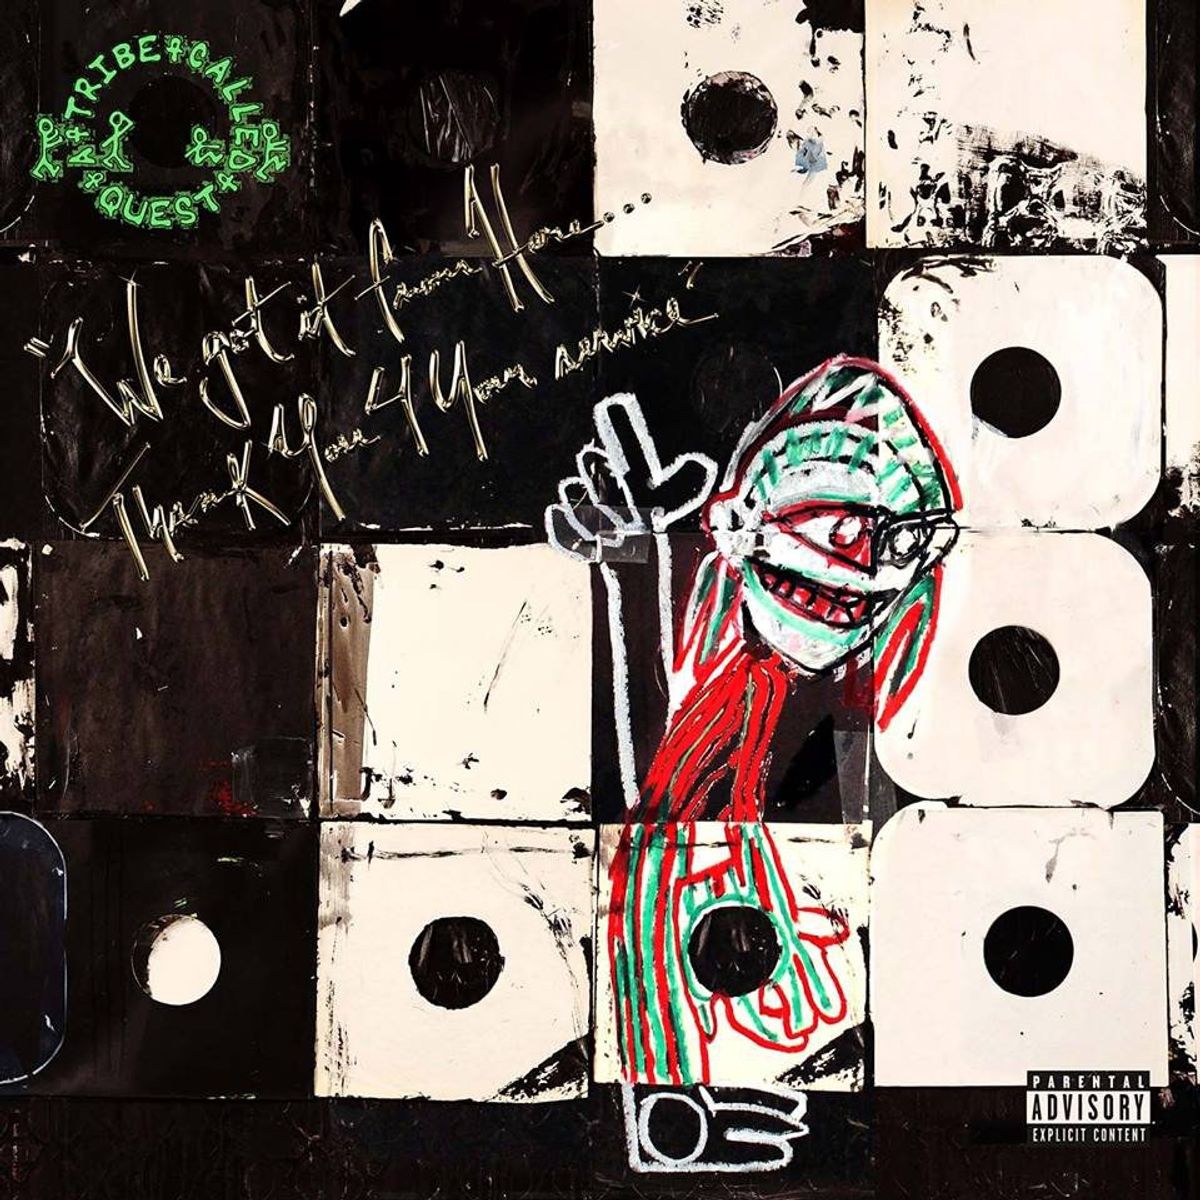 A Tribe Called Quest, Donald Trump, and Hope of The Good Old Days